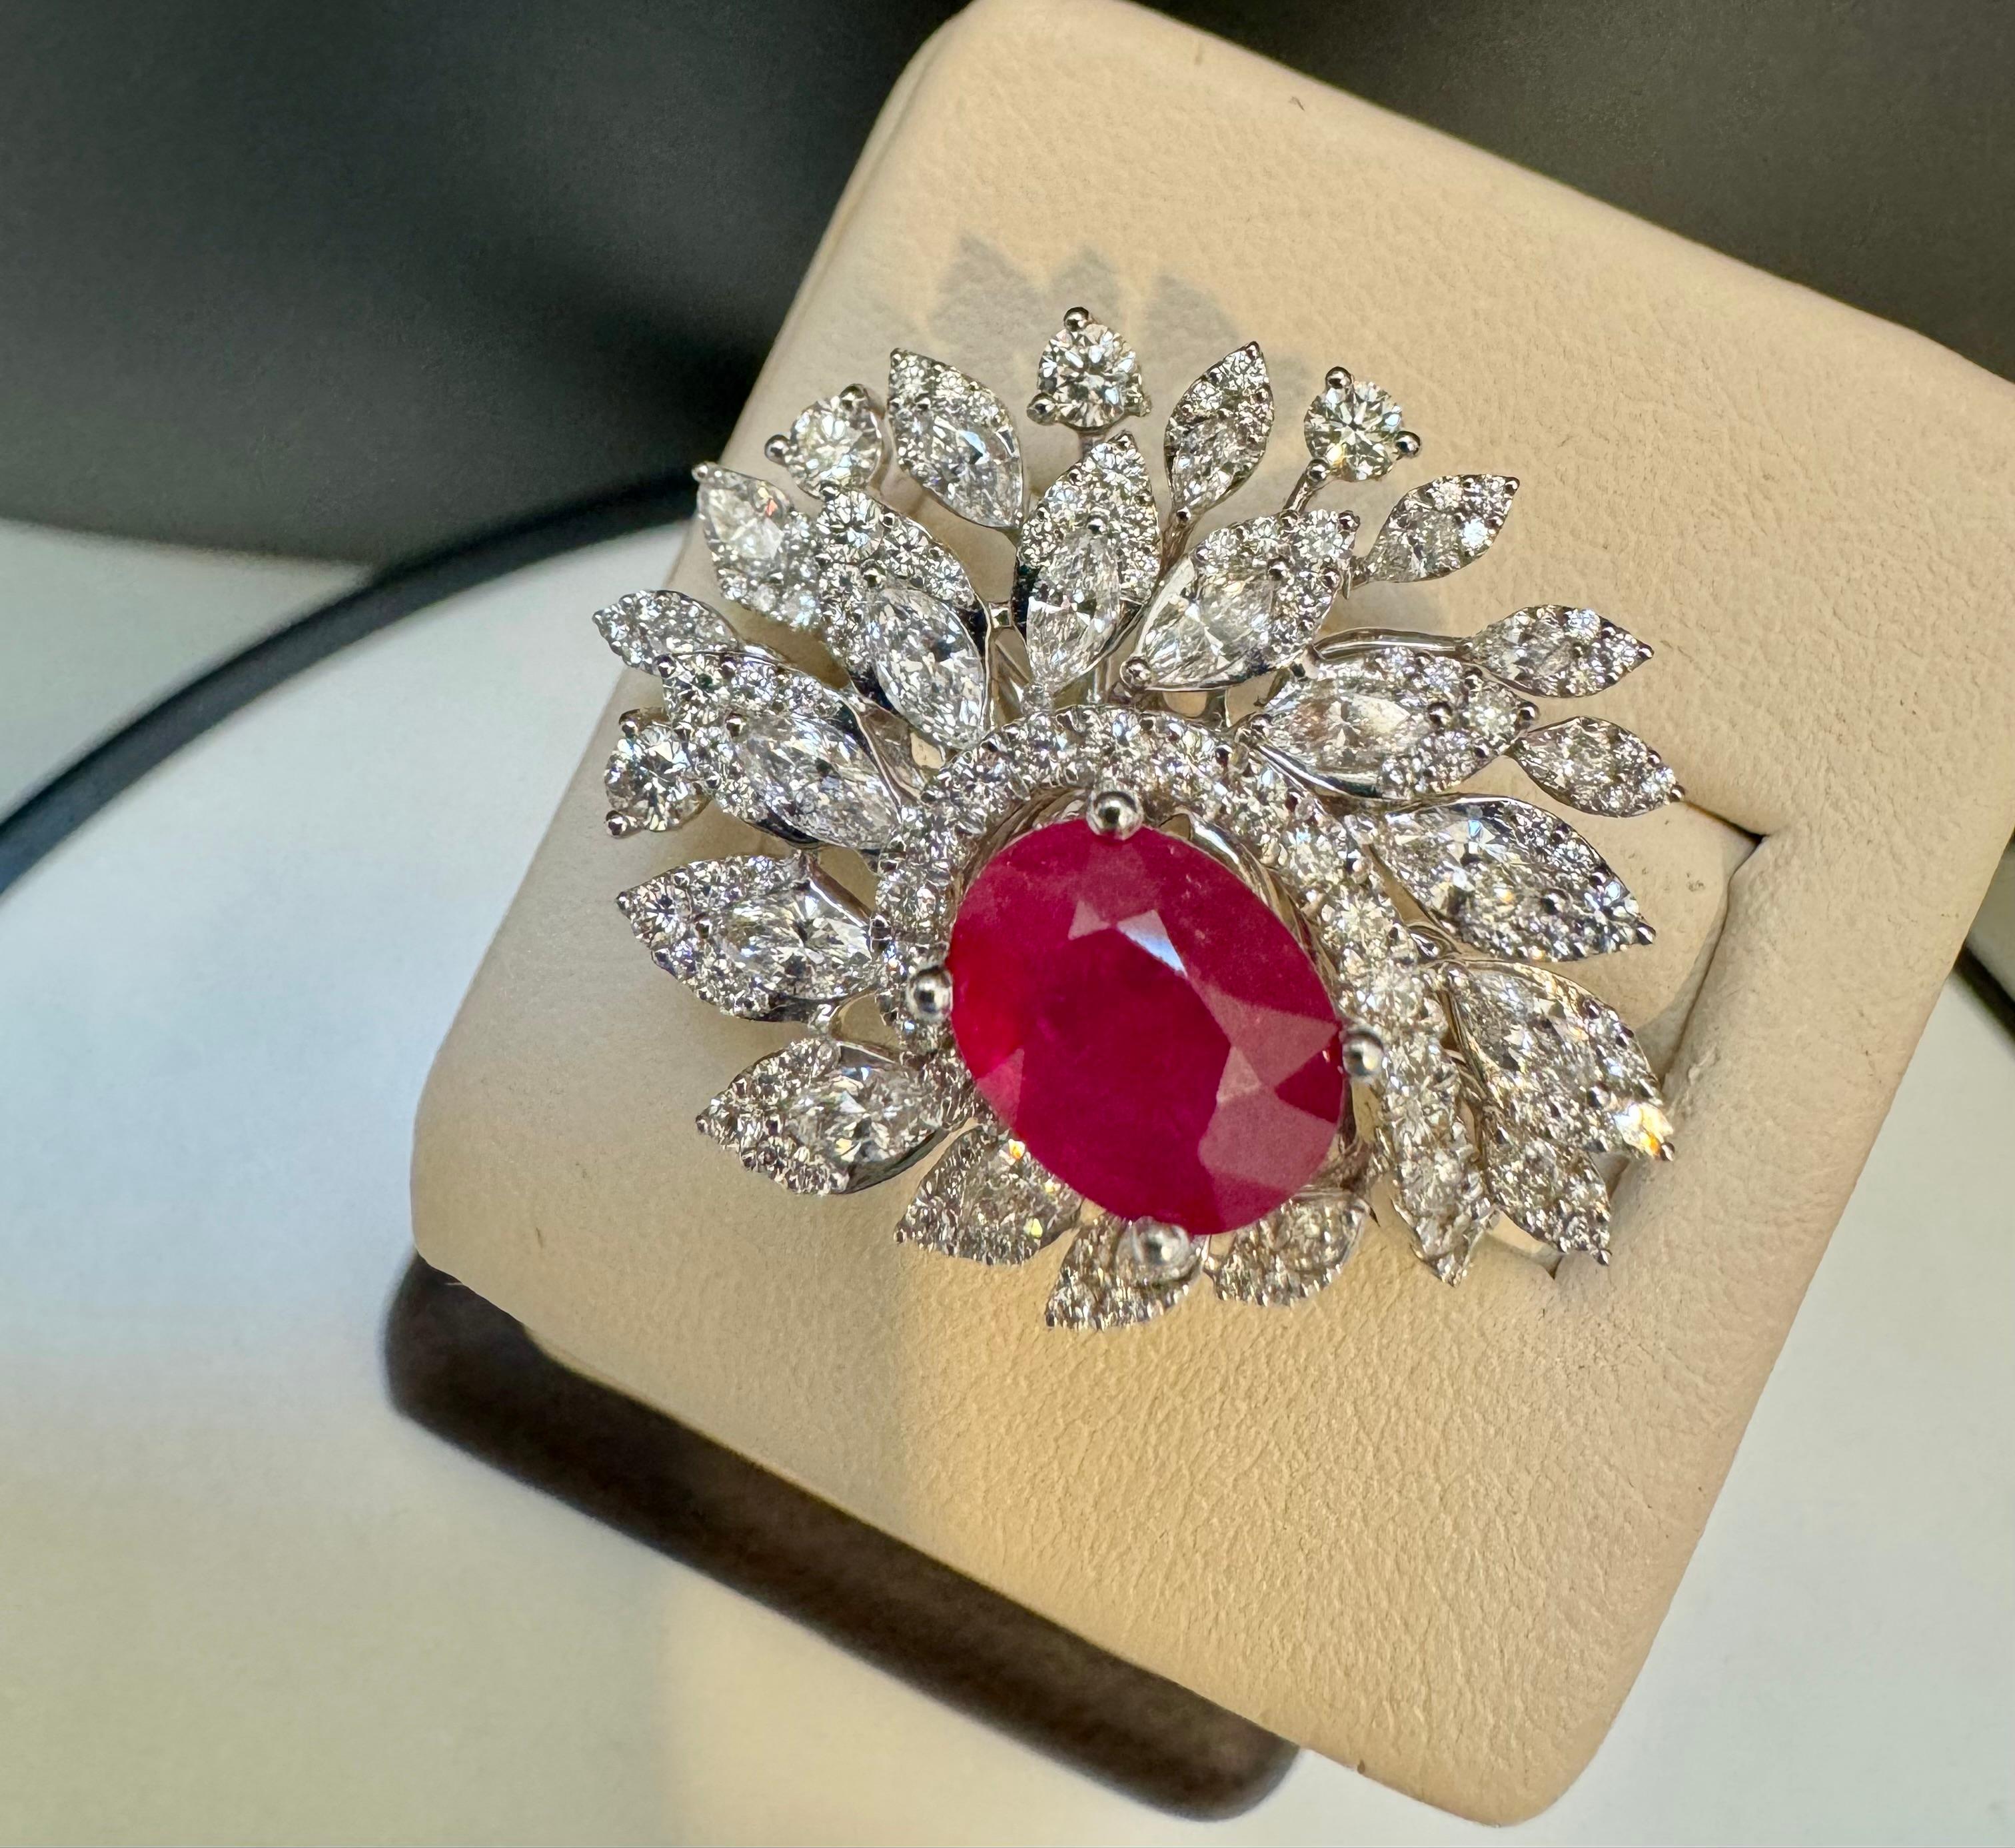 2 Carat Natural Oval  Ruby and 2.5 Carat Diamond 18 Karat White Gold Ring S 5.75
Introducing our exquisite 18 Karat Gold Ring, featuring a stunning 2 carat natural oval Ruby and approximately 2.5 carats of brilliant cut diamonds. This ring is a true